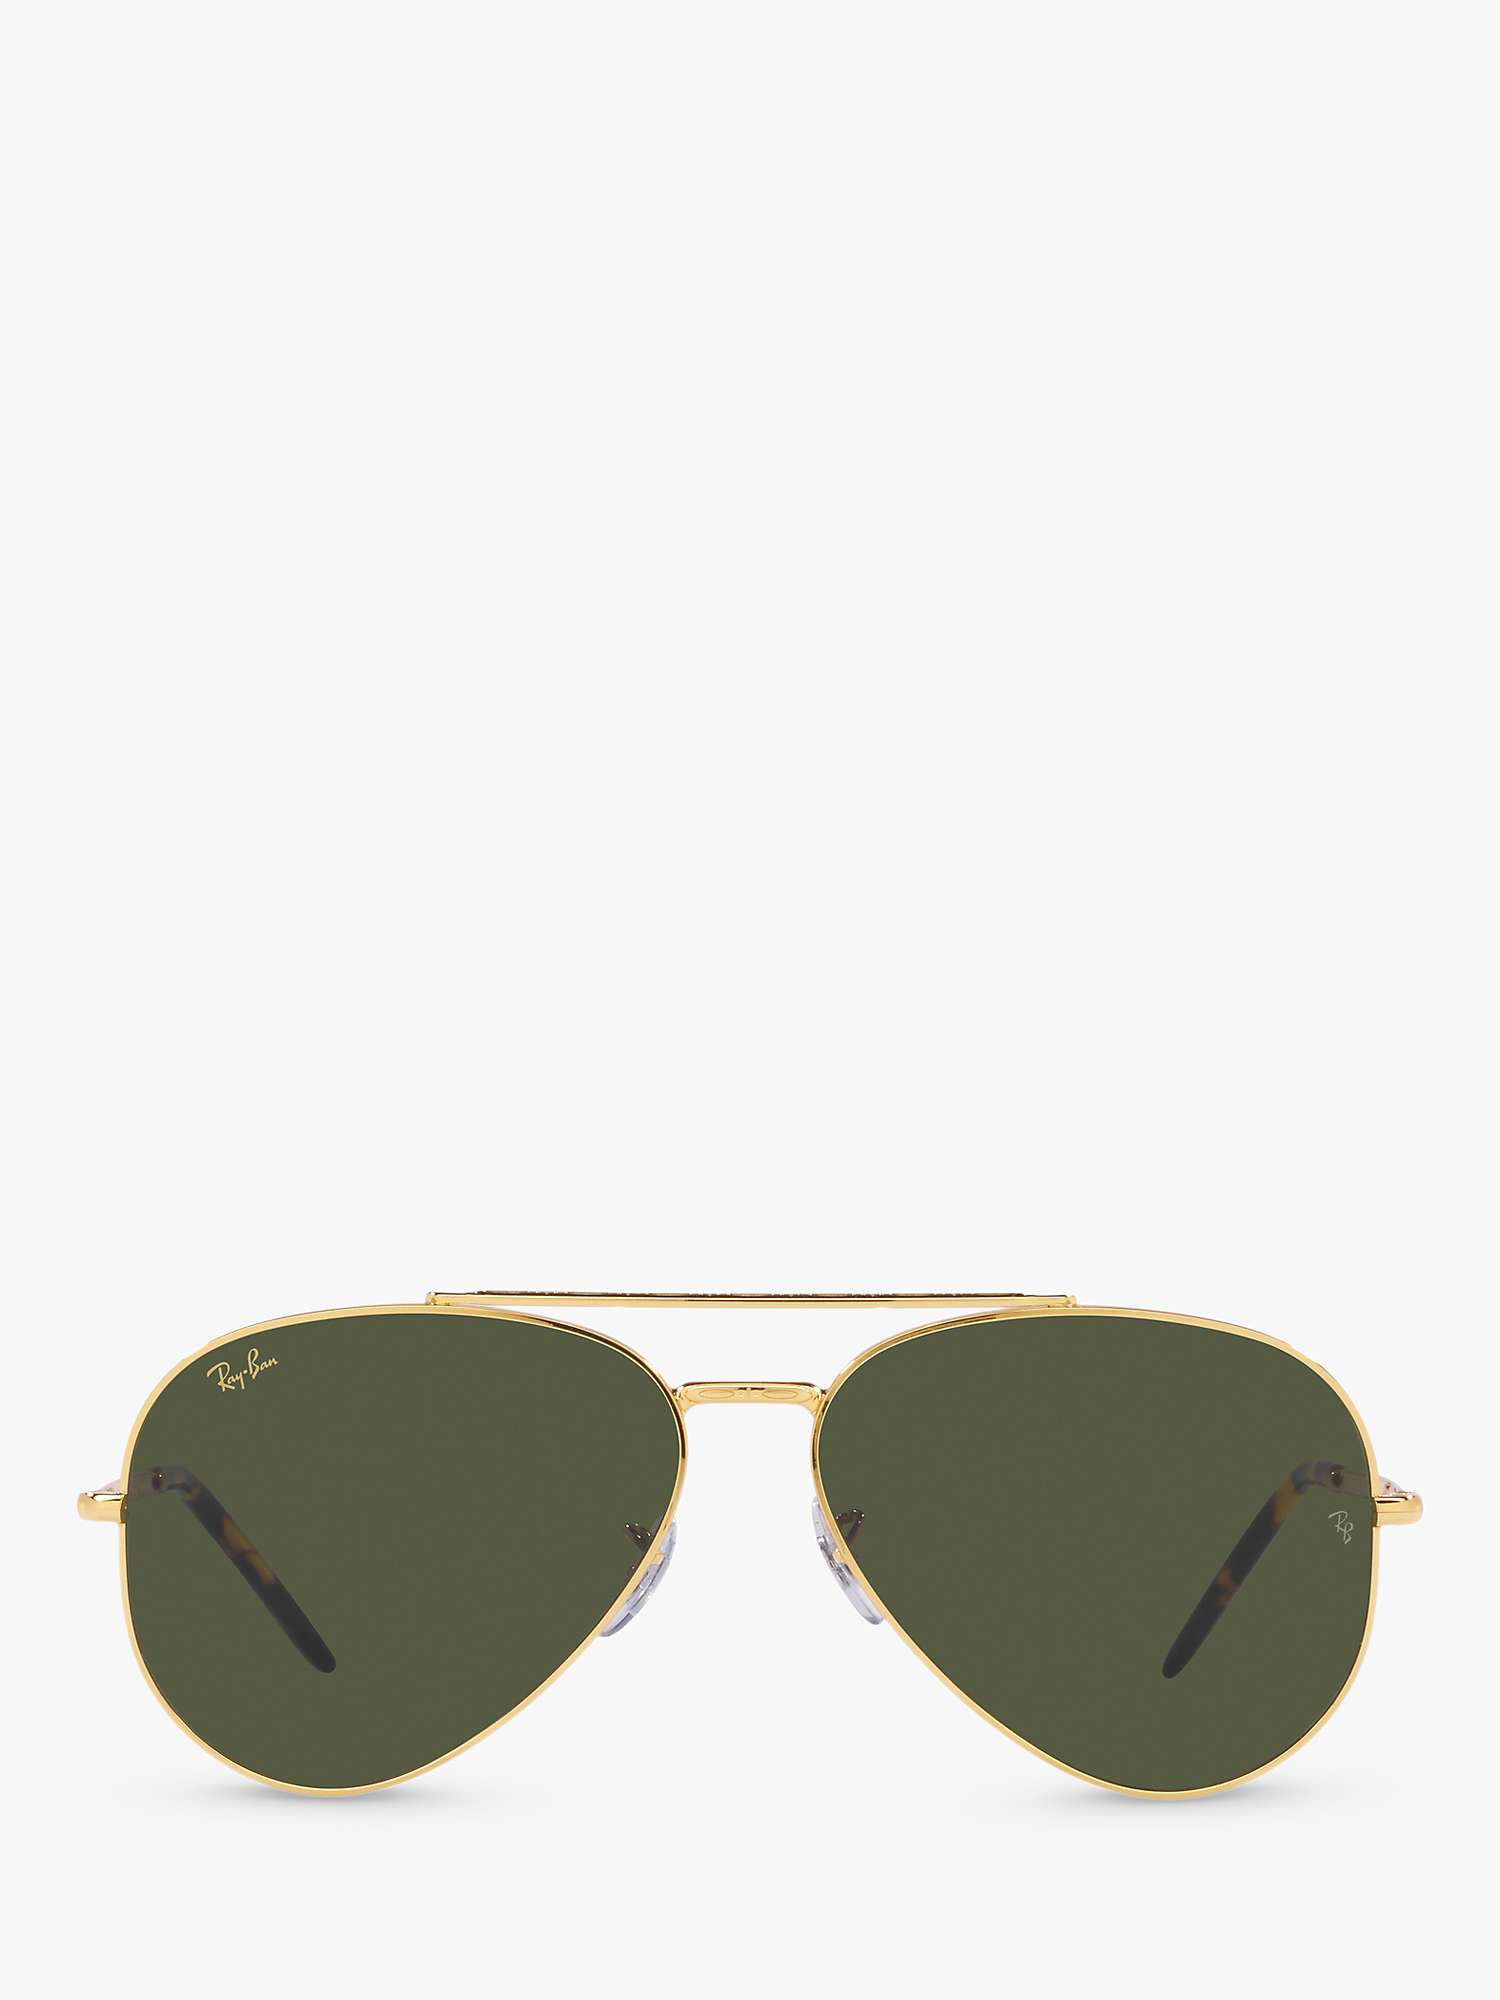 Buy Ray-Ban RB3625 Unisex Aviator Sunglasses, Legend Gold/Green Online at johnlewis.com